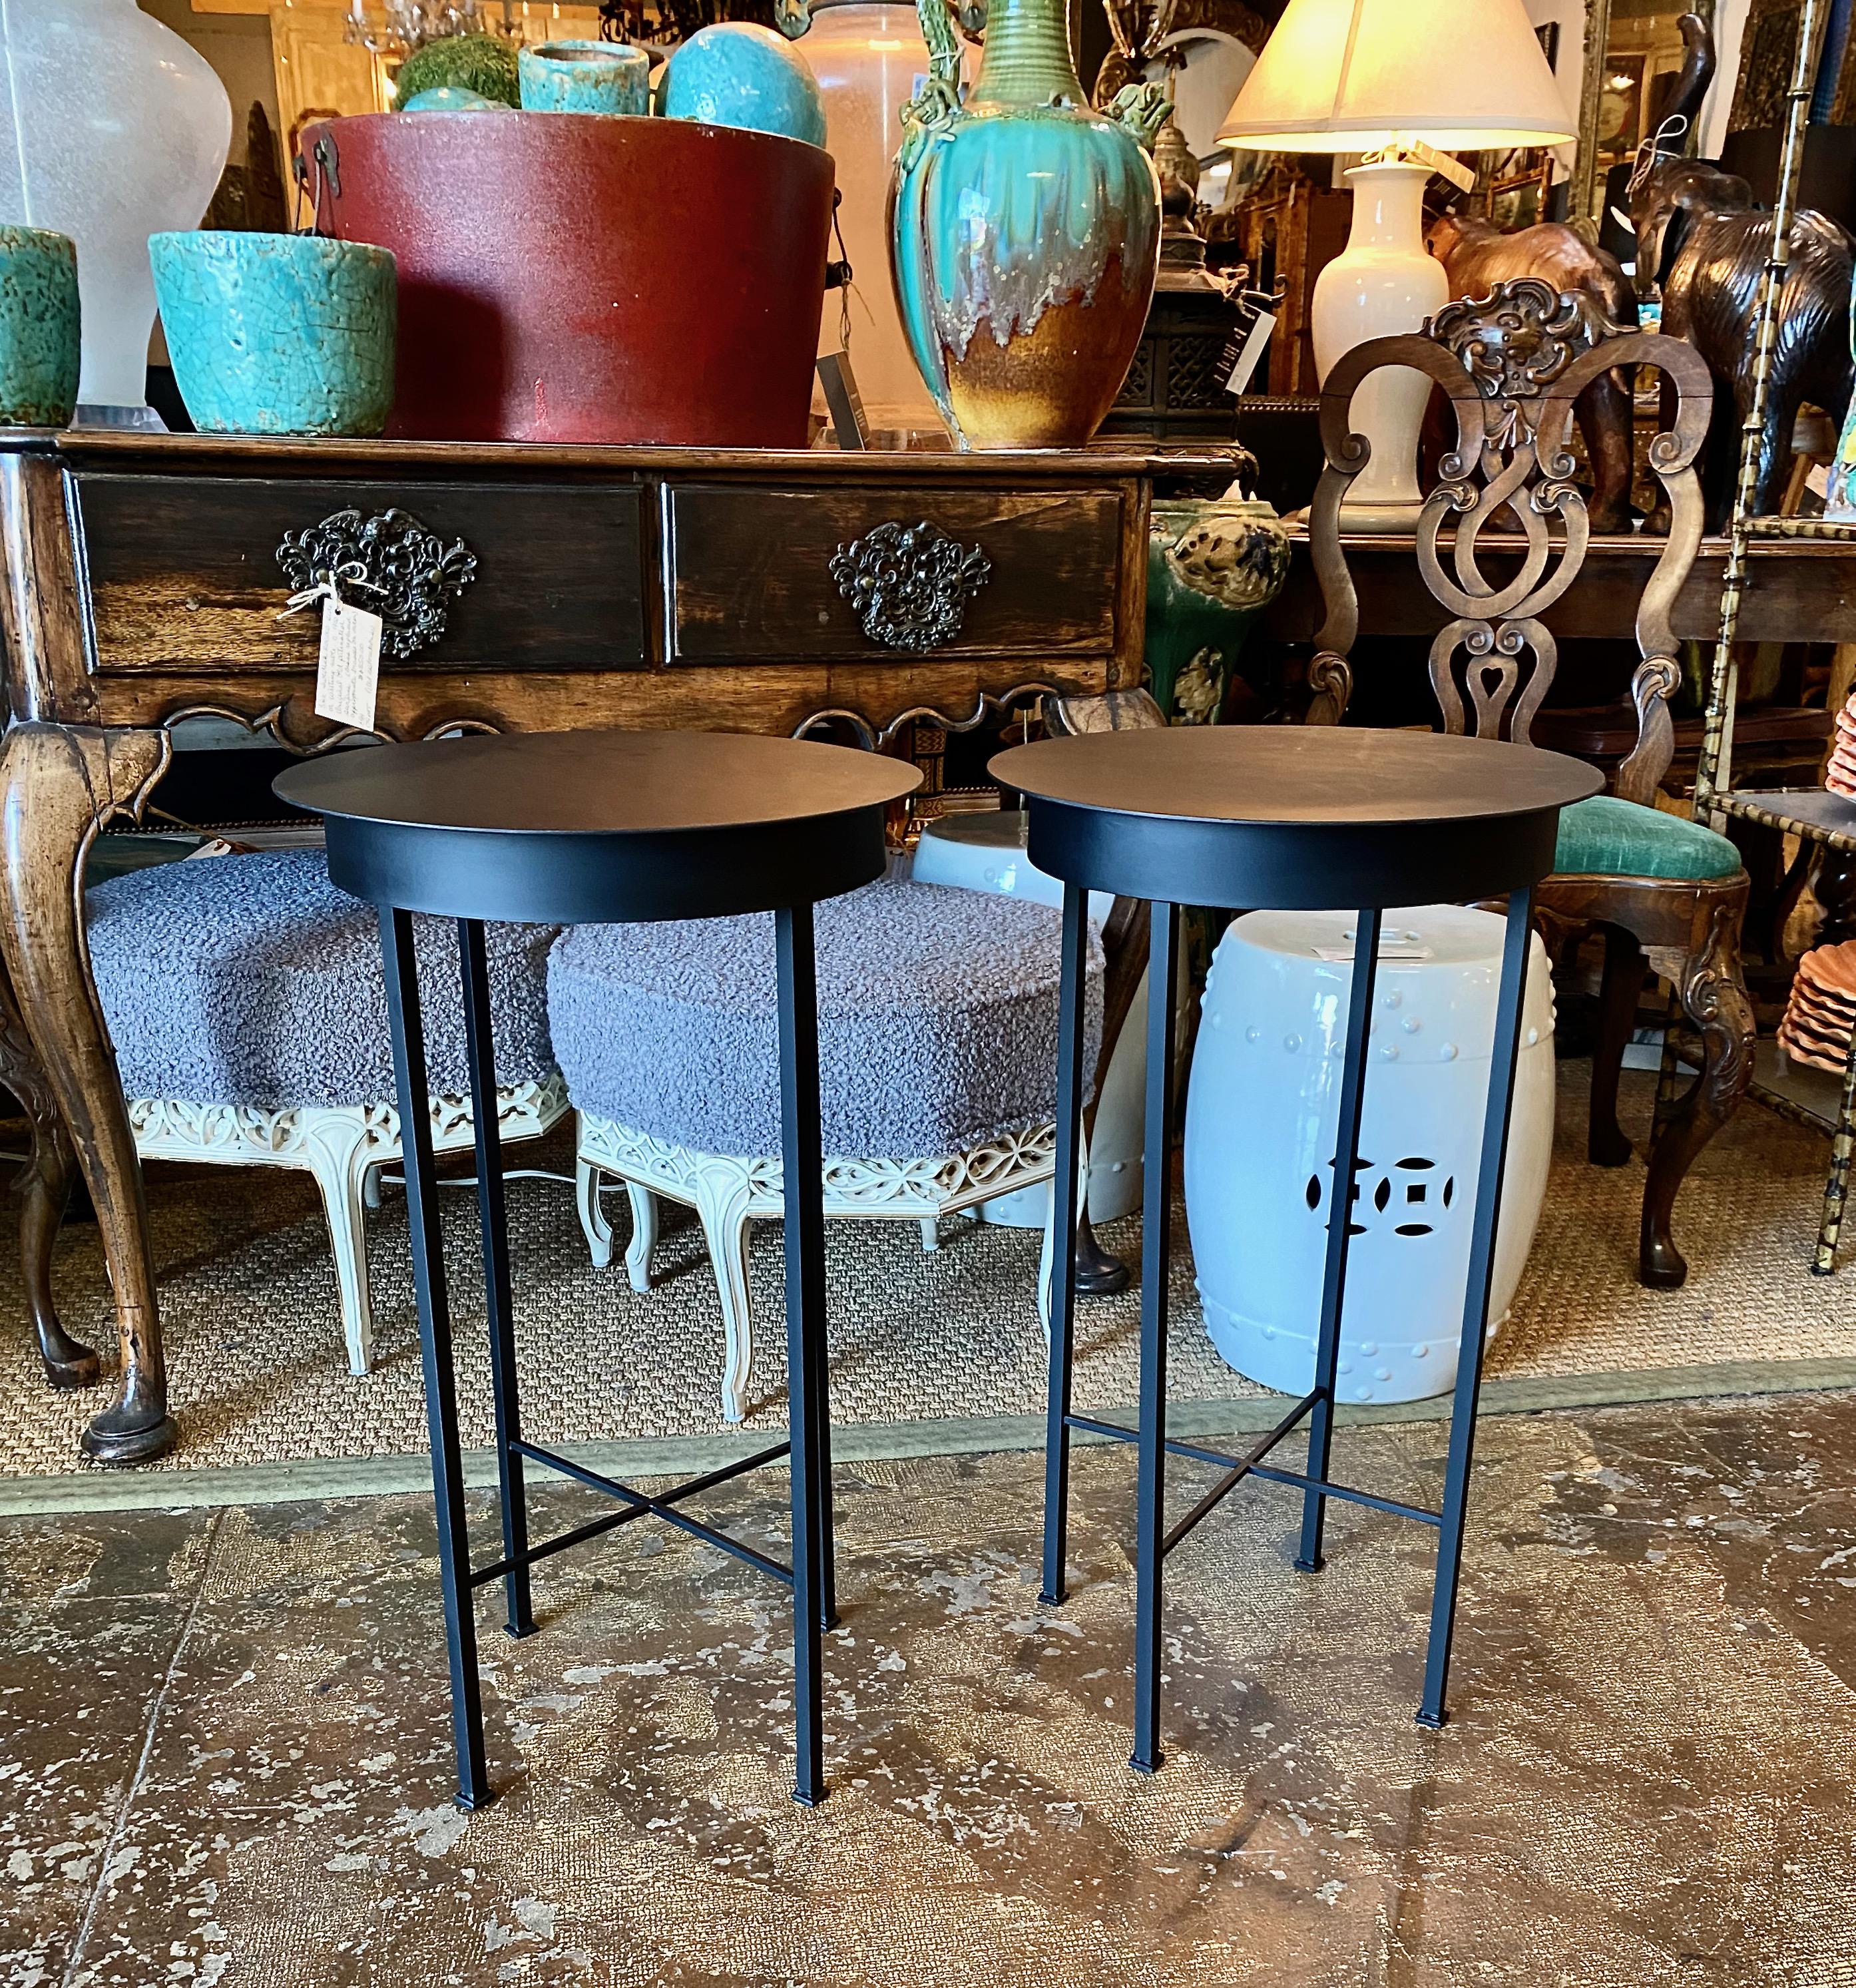 This is a chic pair of iron side tables or stands that were inspired by a pair of French tables. These charming tables are suitable for indoor, as well as outdoor use. We acquired a pair of similar vintage French tables a few months ago; they sold